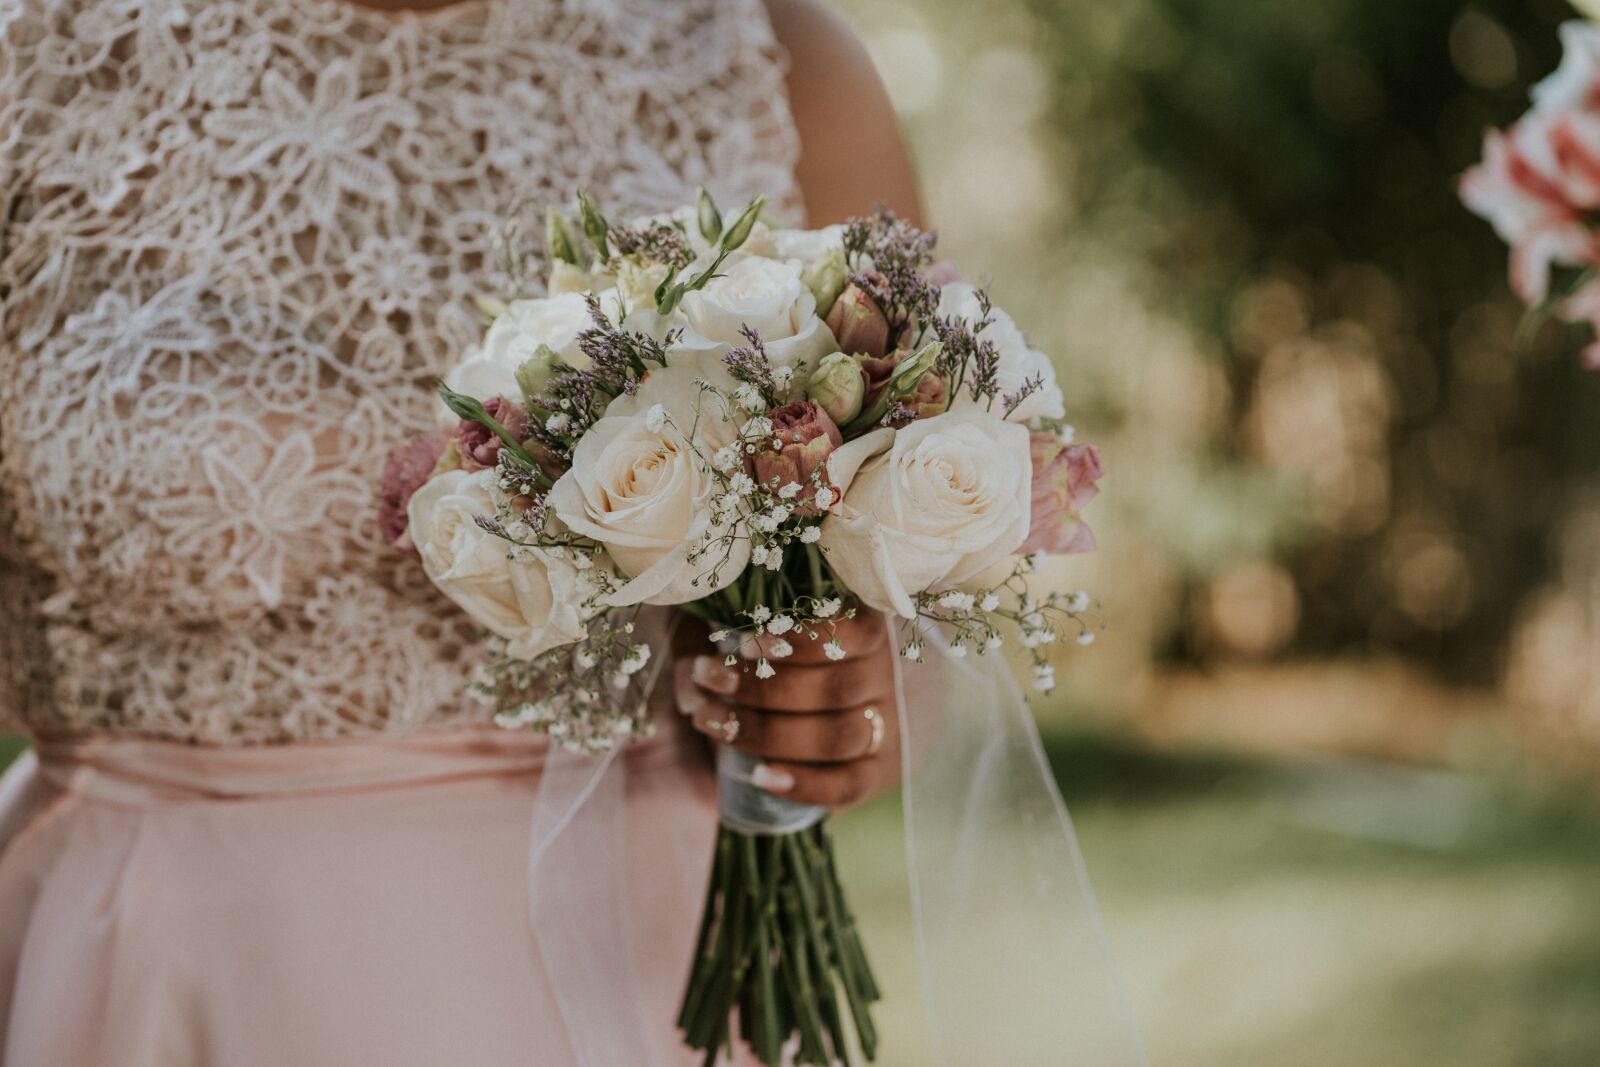 Sony a7 III sample photo. Marriage, bouquet, flowers photography